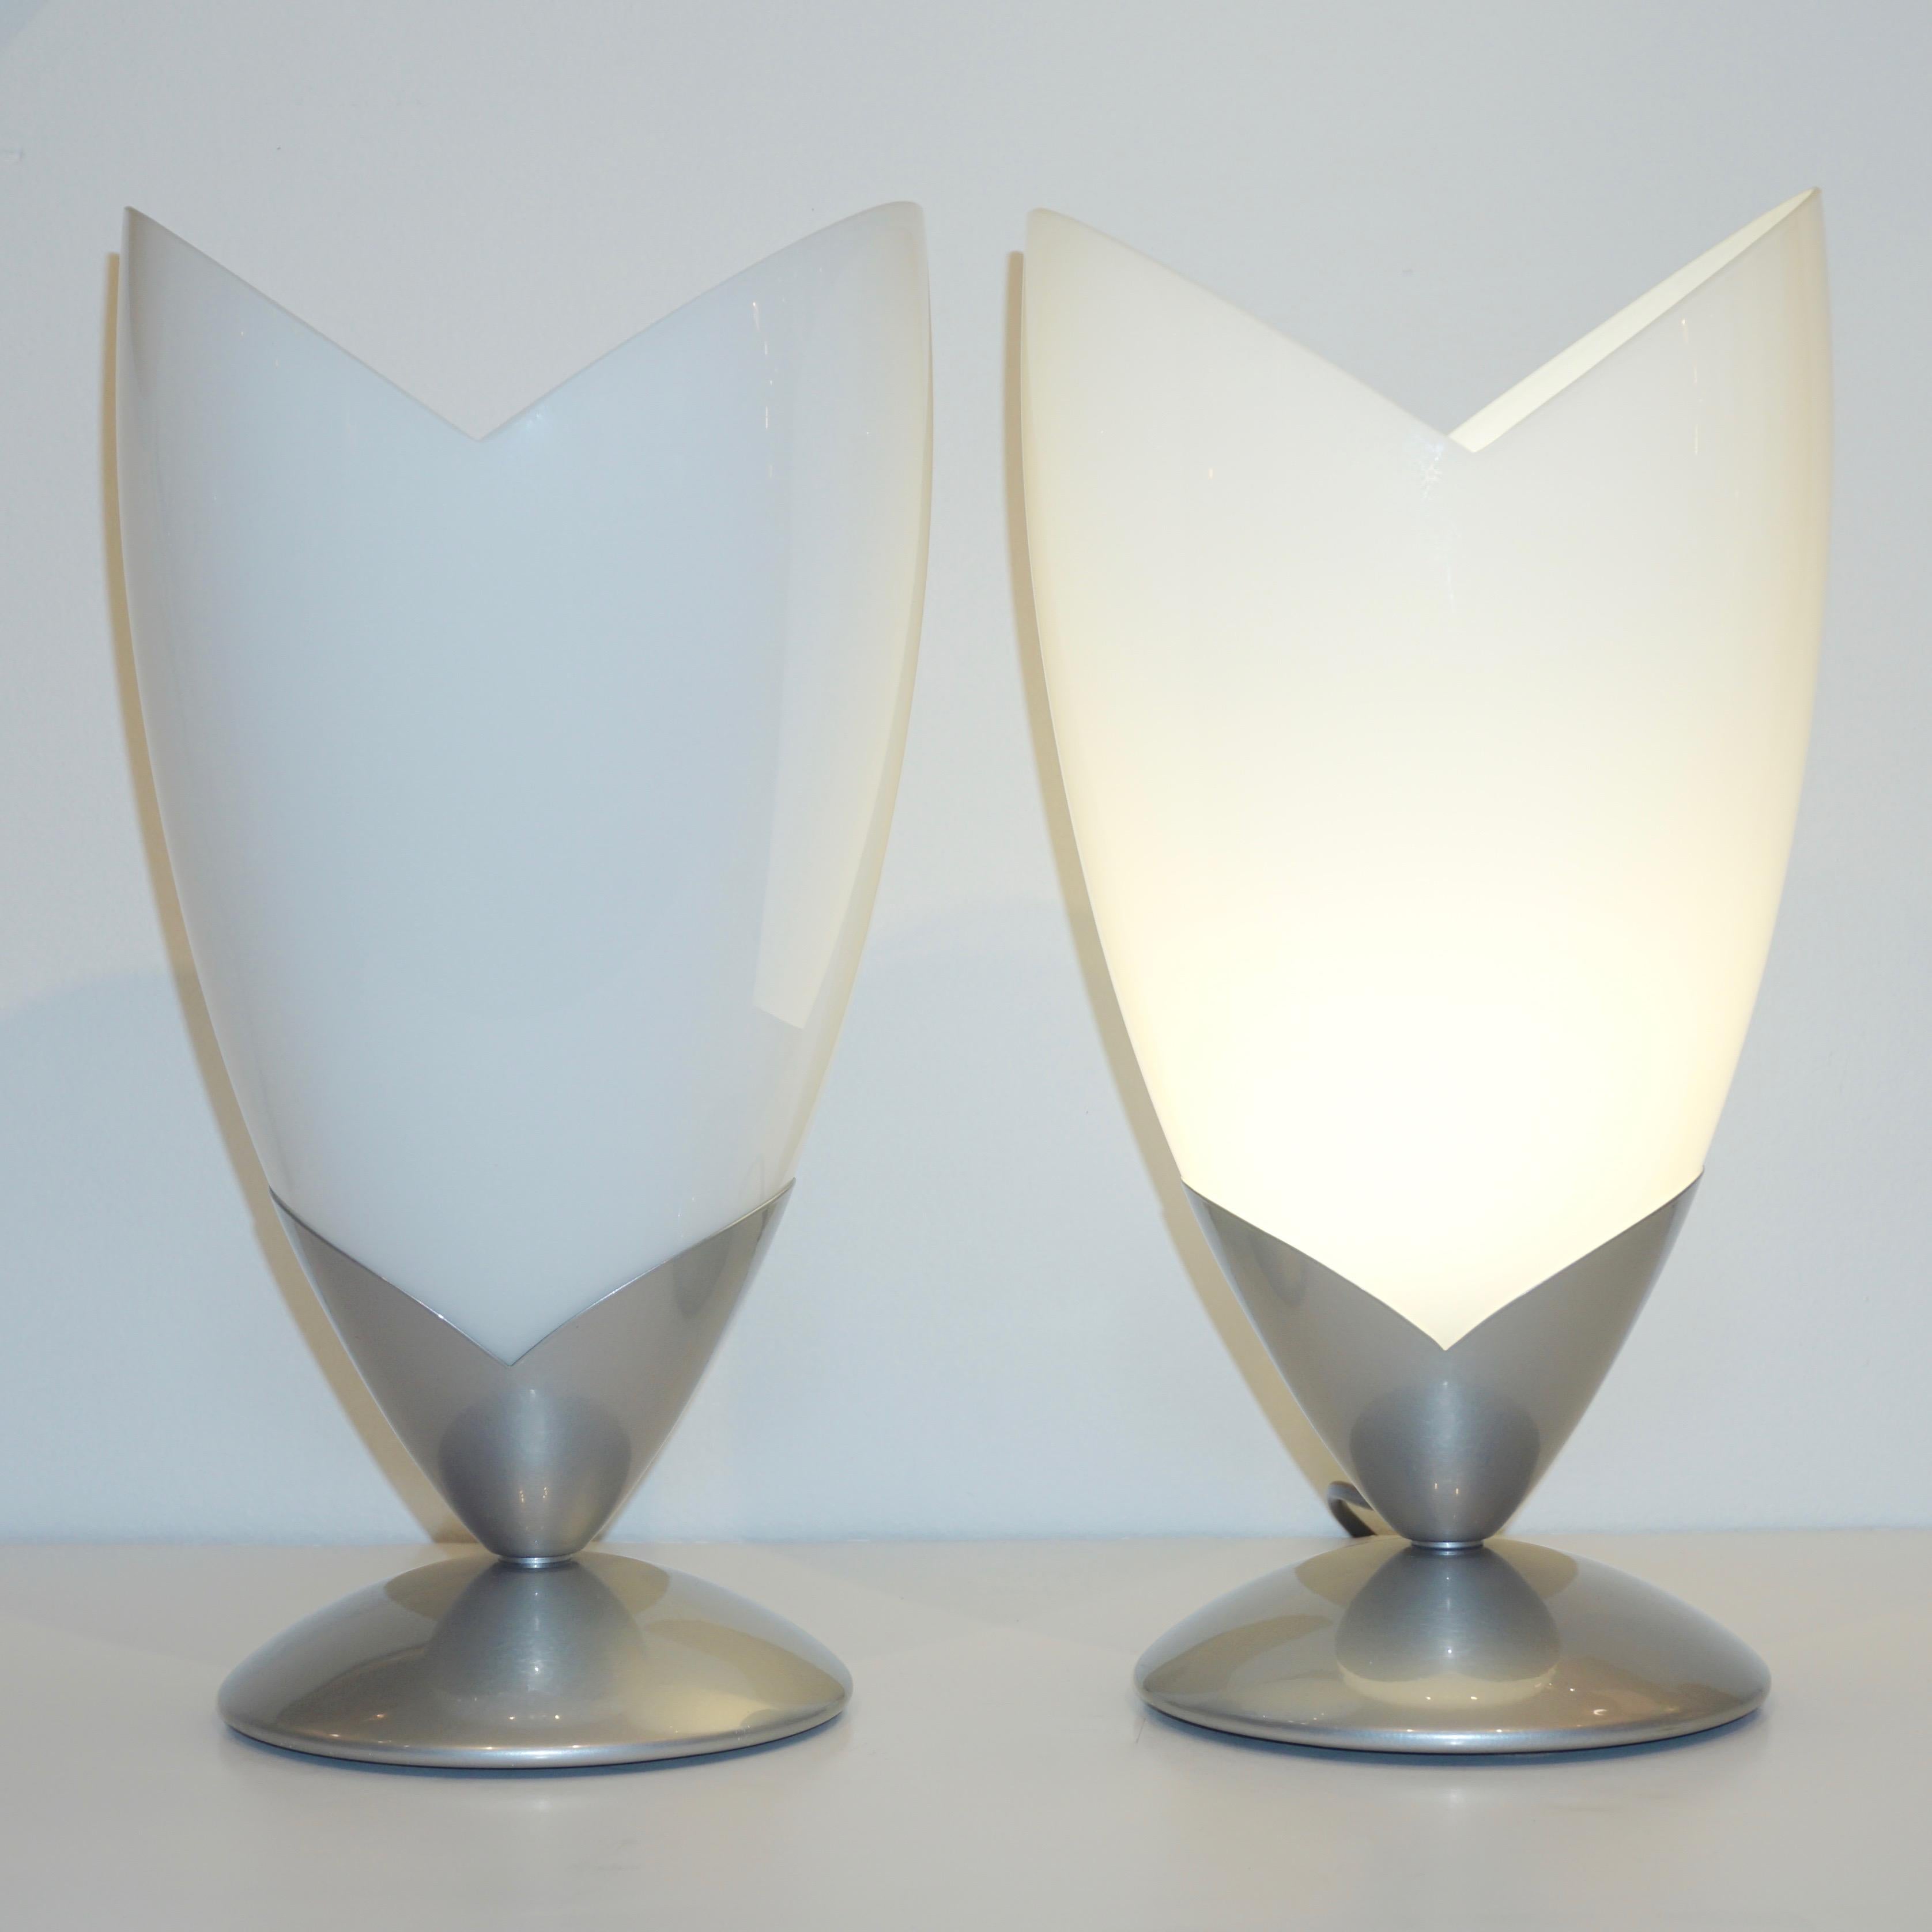 Hand-Crafted 1970s Italian Pair of Satin Nickel & White Glass Organic Tulip Lamps by Tronconi For Sale